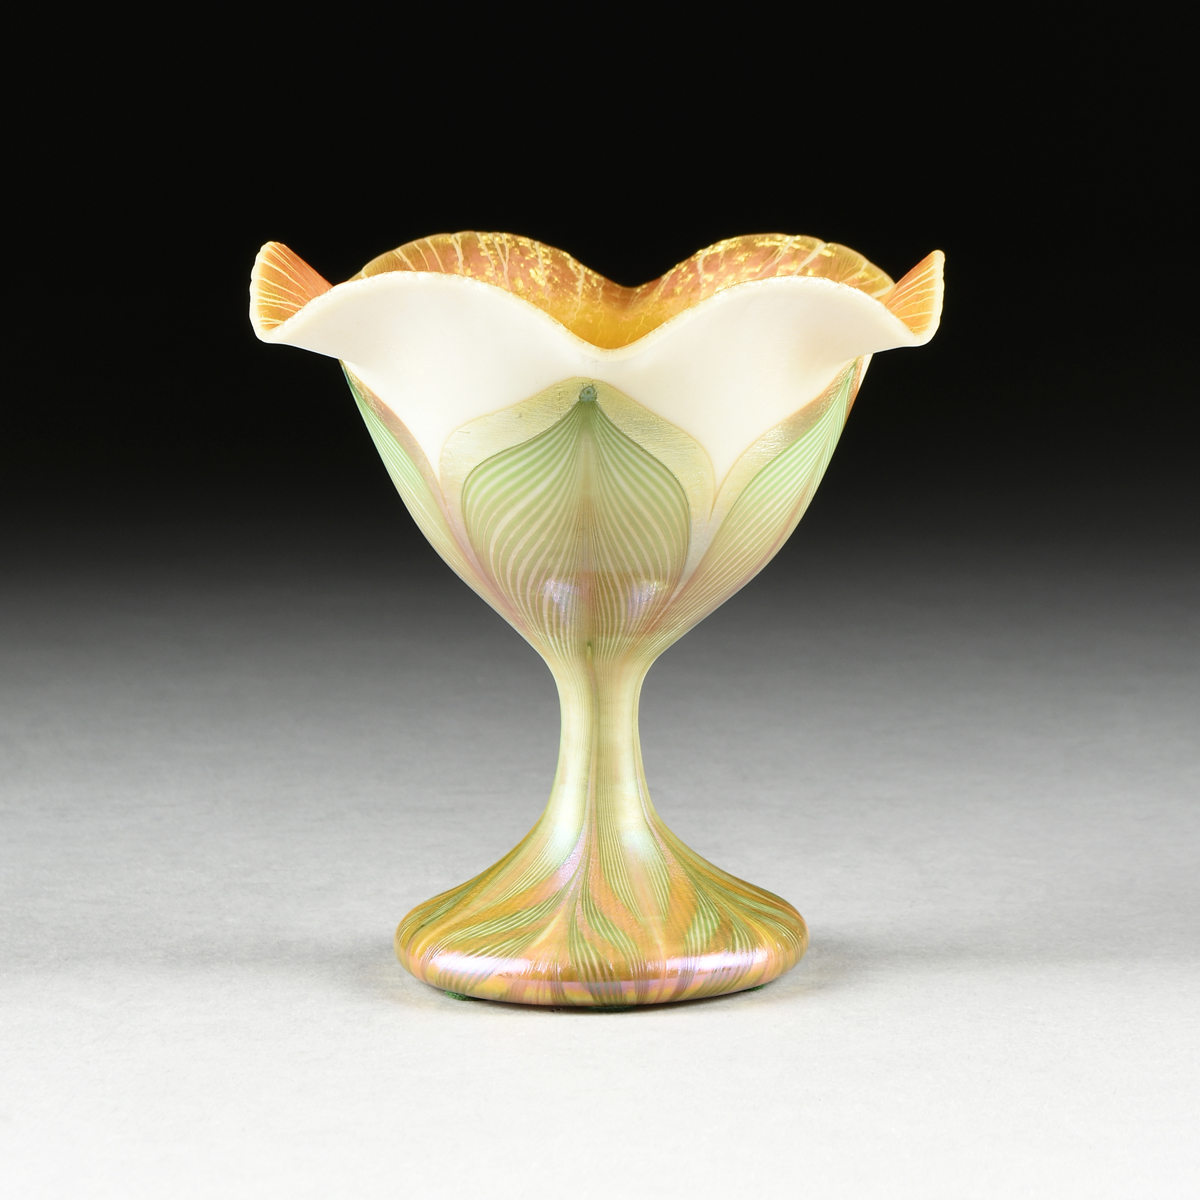 A QUEZAL ART GLASS FOOTED COMPOTE VASE, SIGNED, NEW YORK, EARLY 20TH CENTURY, the floriform